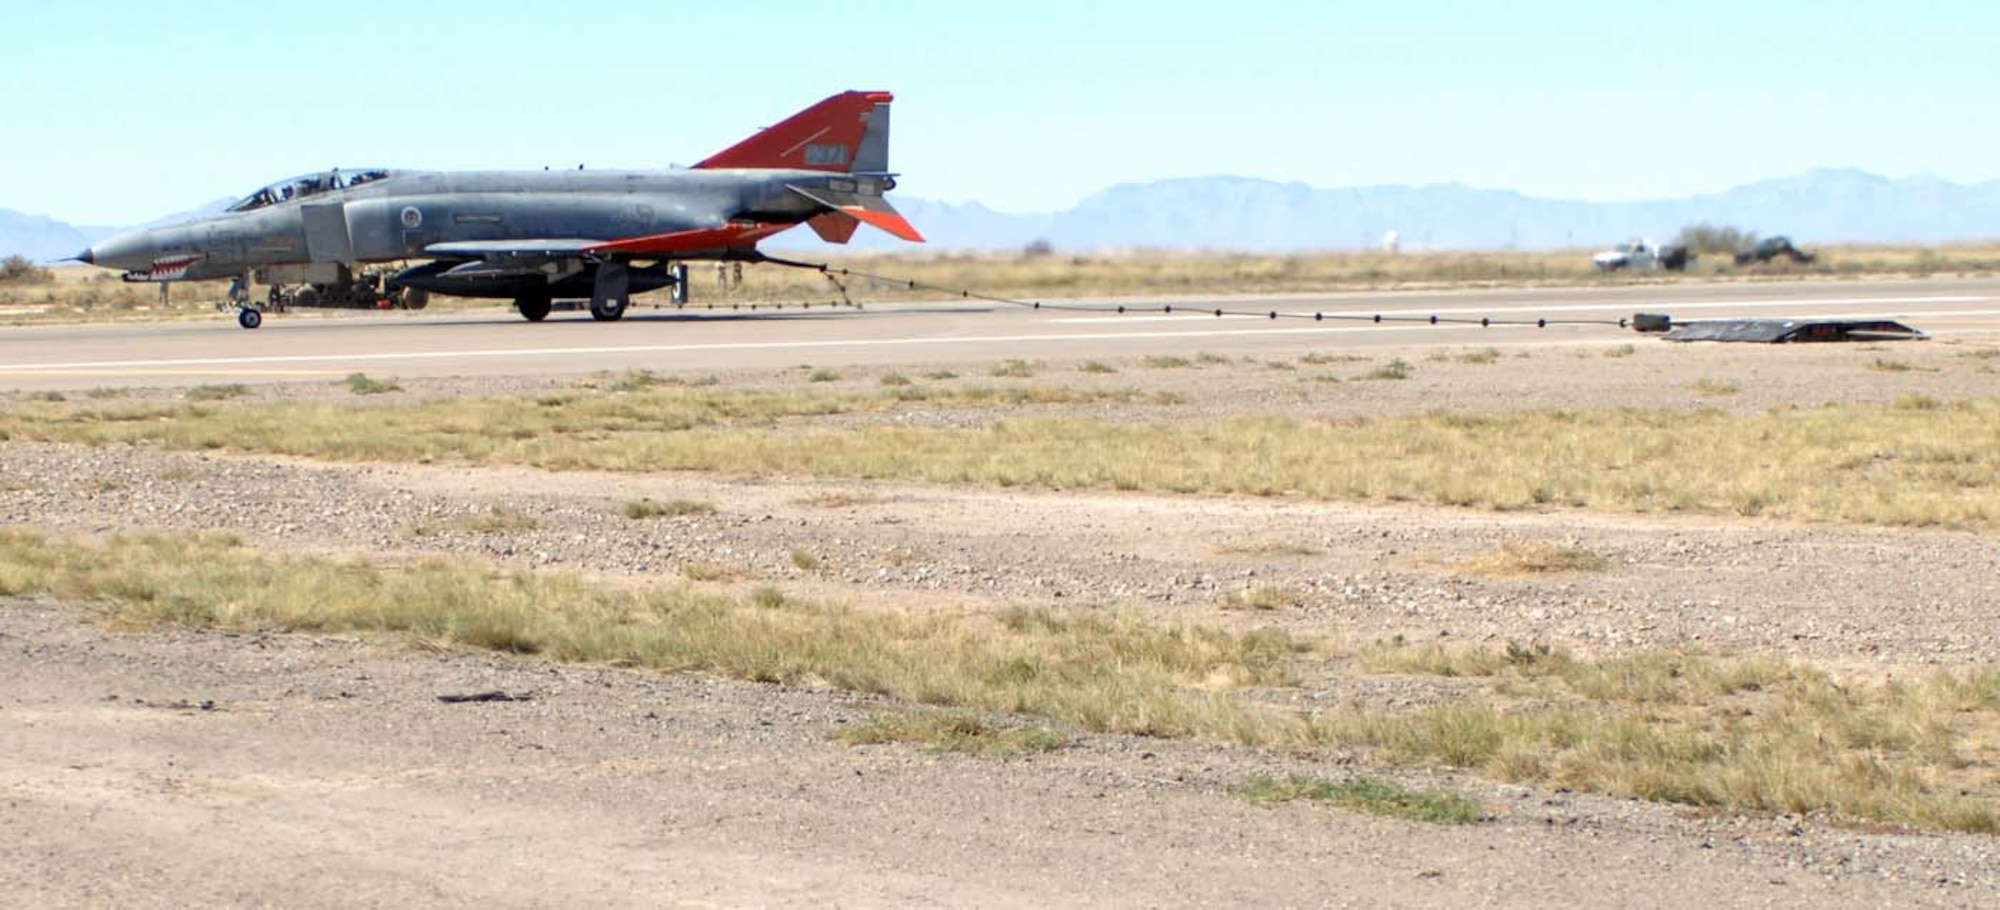 A QF-4 Drone engages the new aircraft arresting system at Holloman Air Force Base, N.M., October 23 after simulating an emergency landing on the flightline during the certfication of the new system.(U.S. Air Force photo/ Staff Sgt. Terri Barriere)